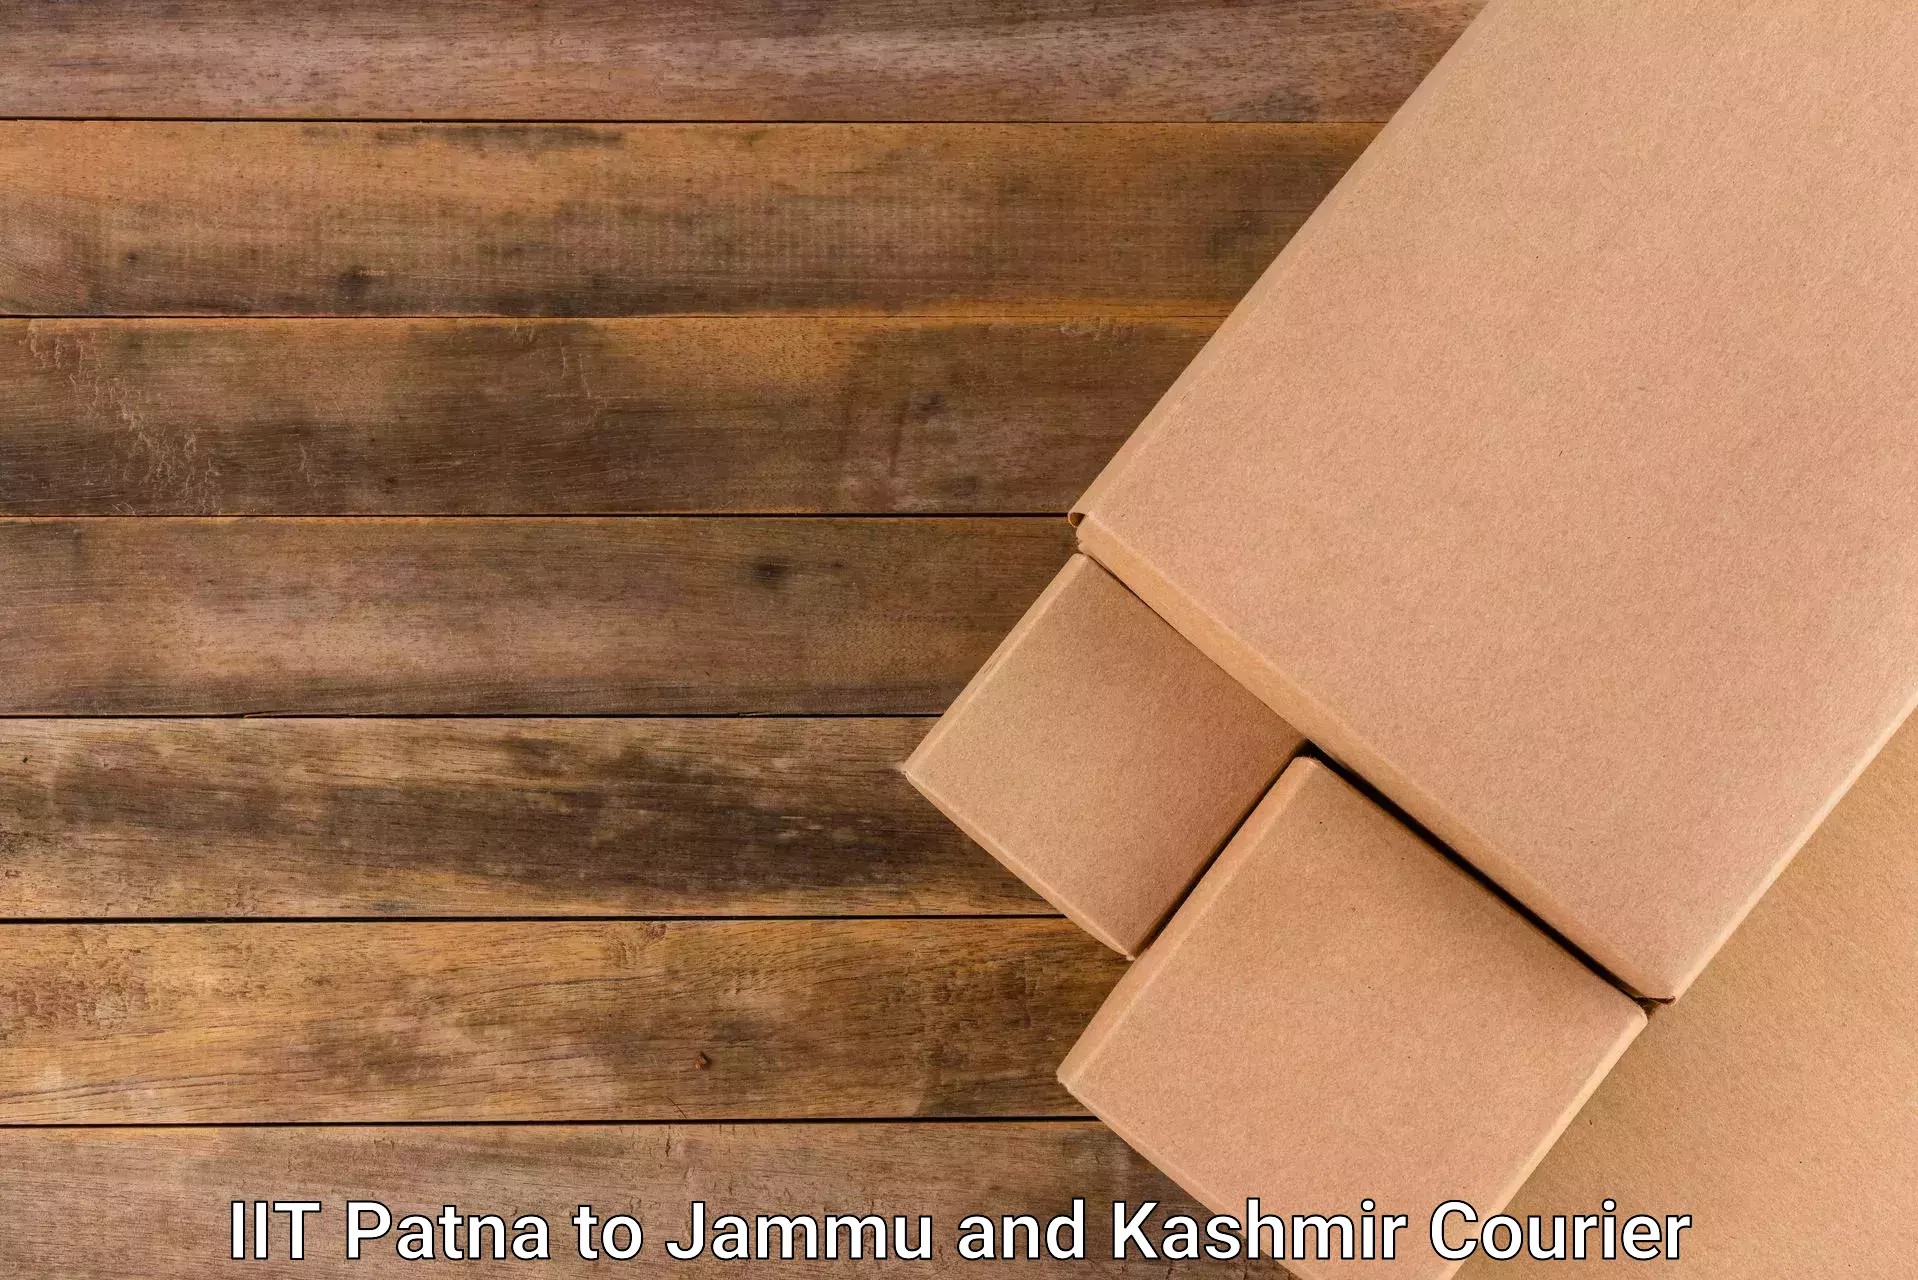 Local courier options IIT Patna to Bhaderwah